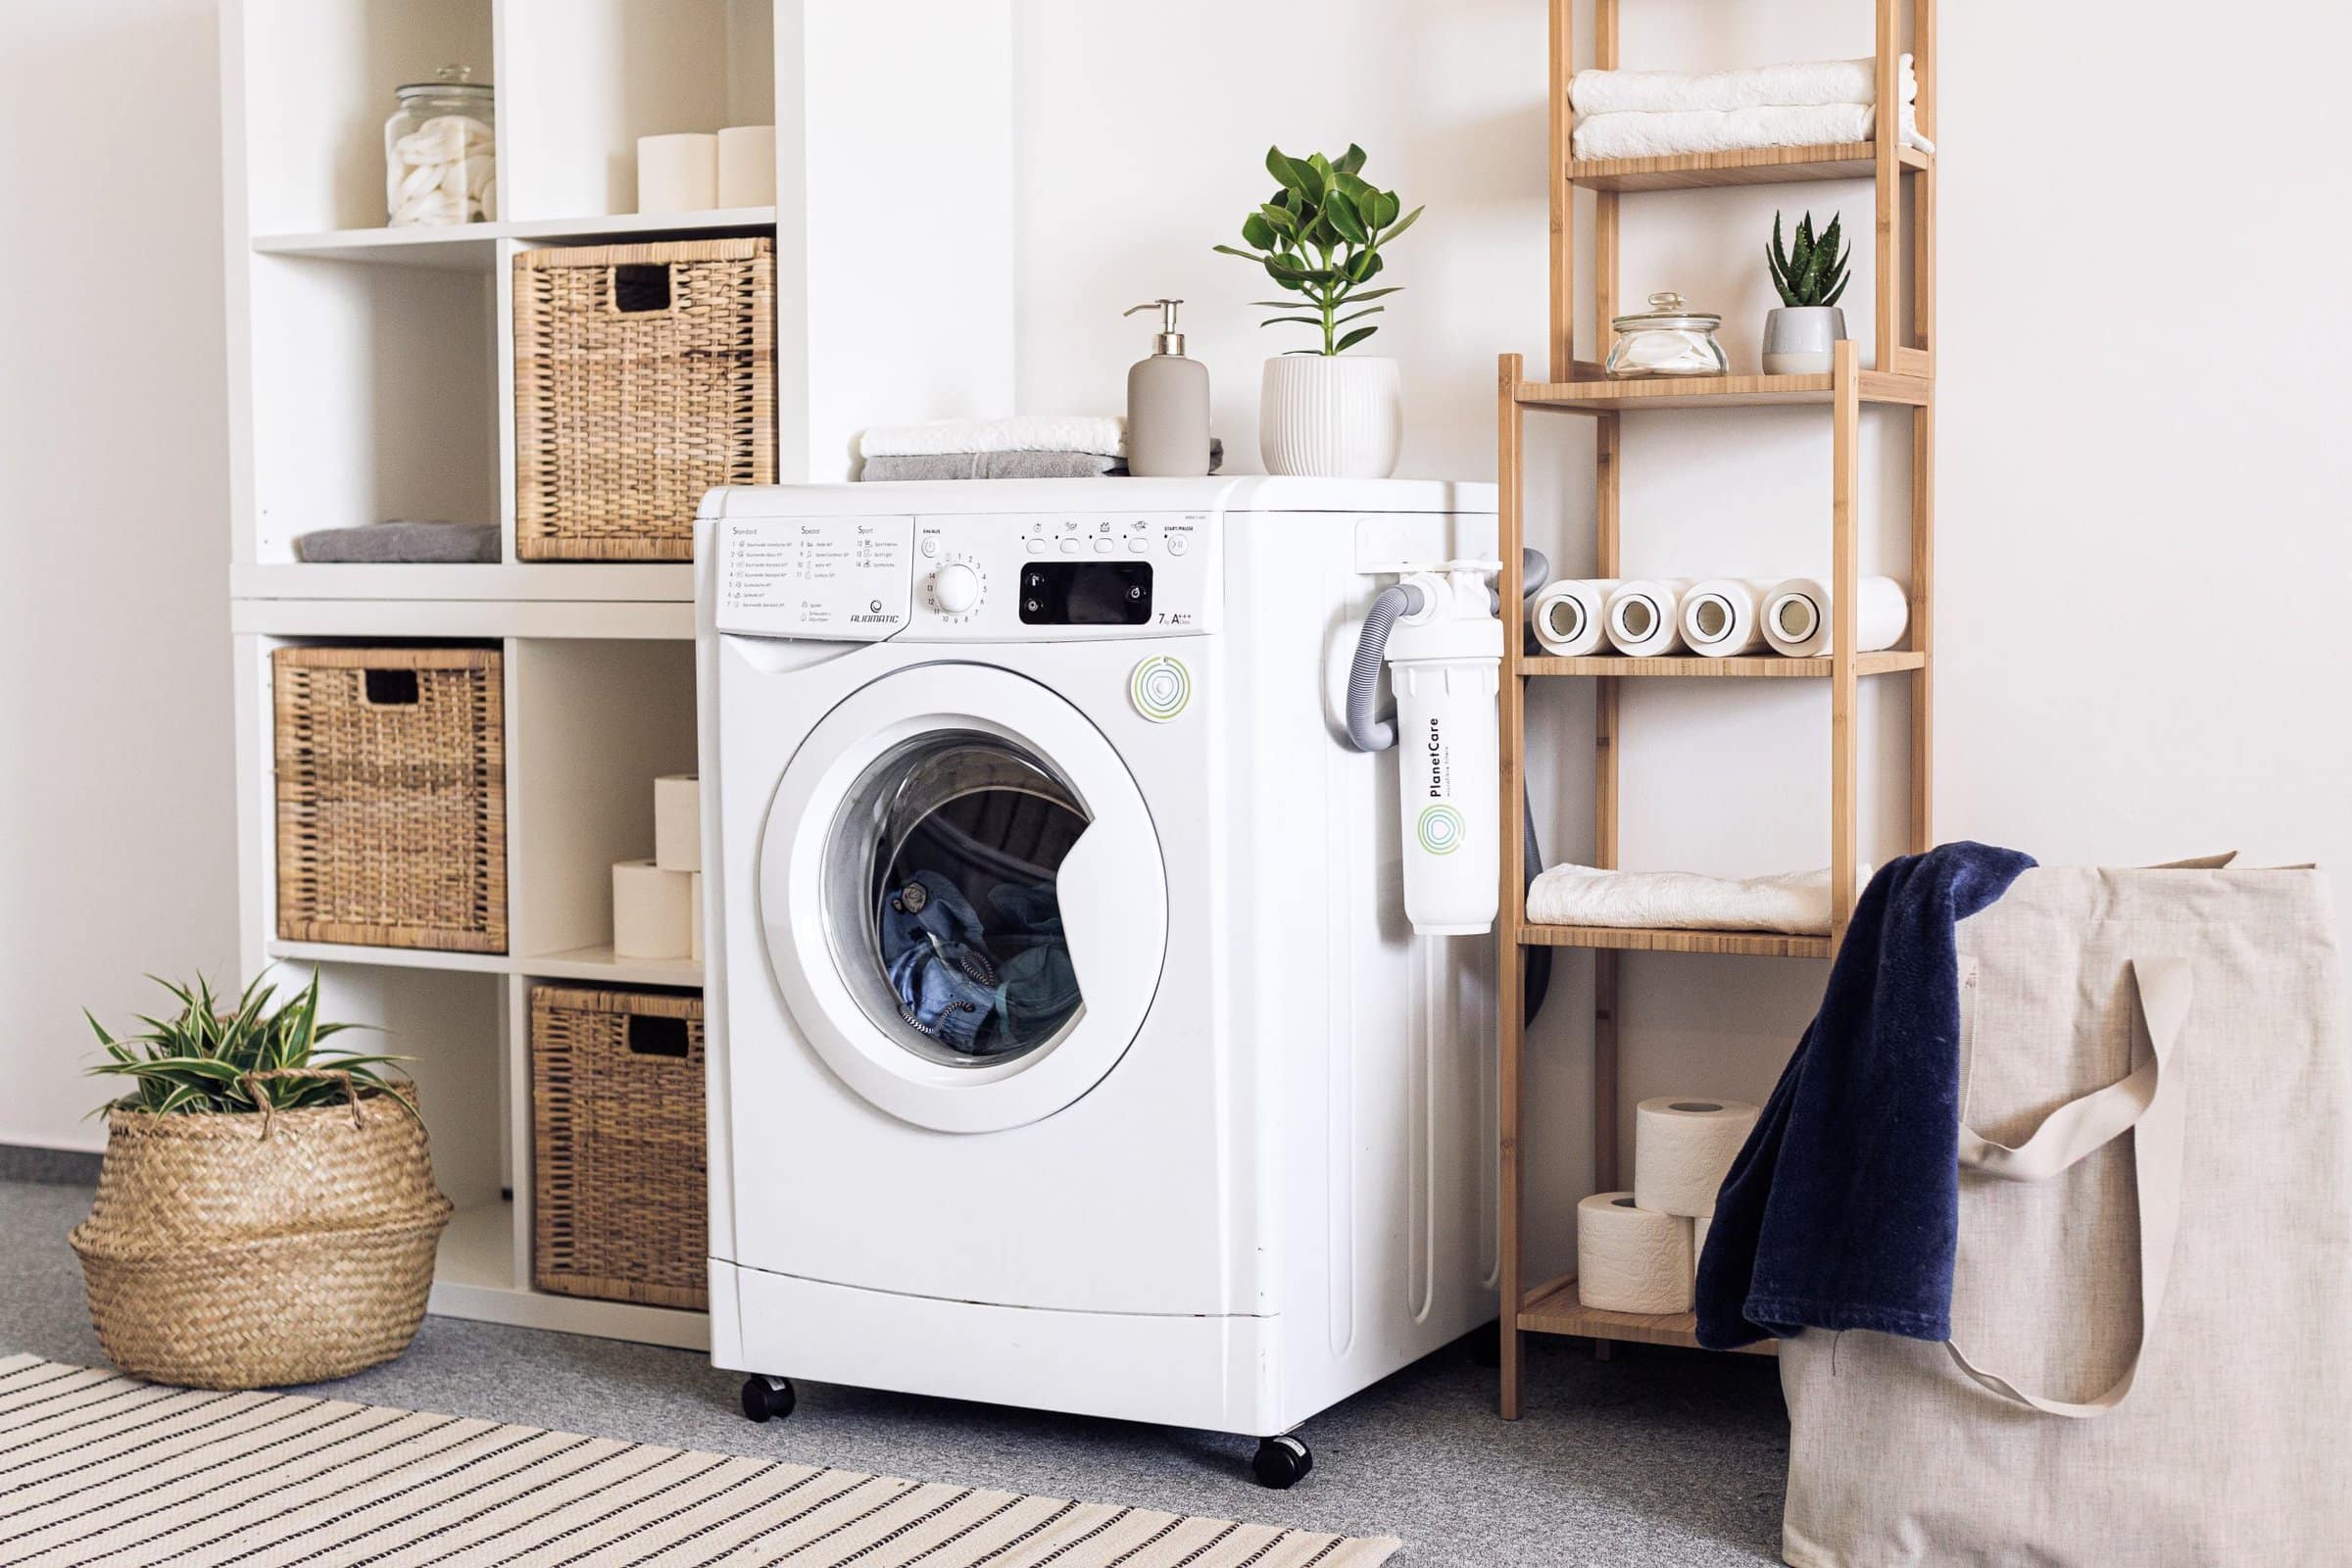  Making the Most of Your Laundry Room Space scaled